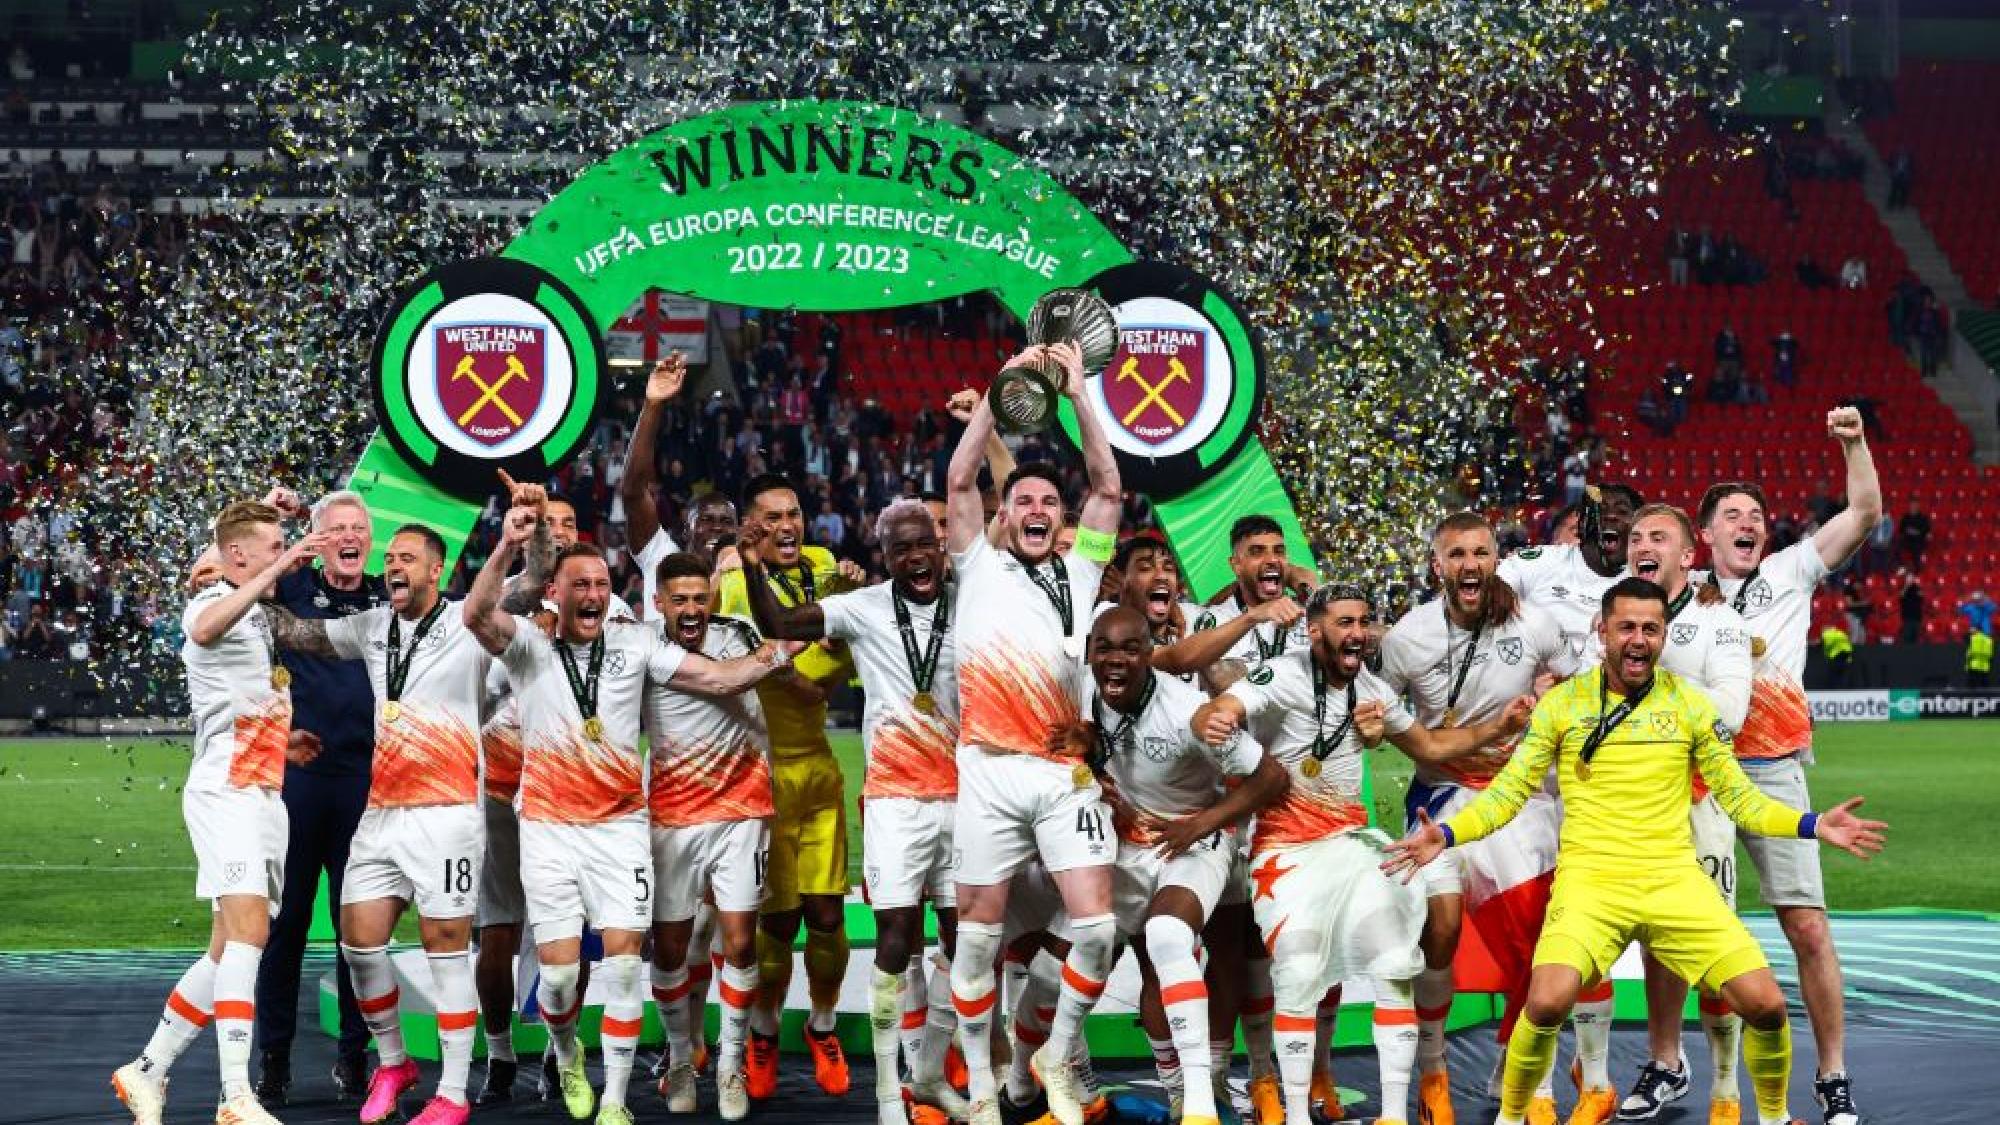 In Pictures: Hammers lift UEFA Europa Conference League trophy | West ...